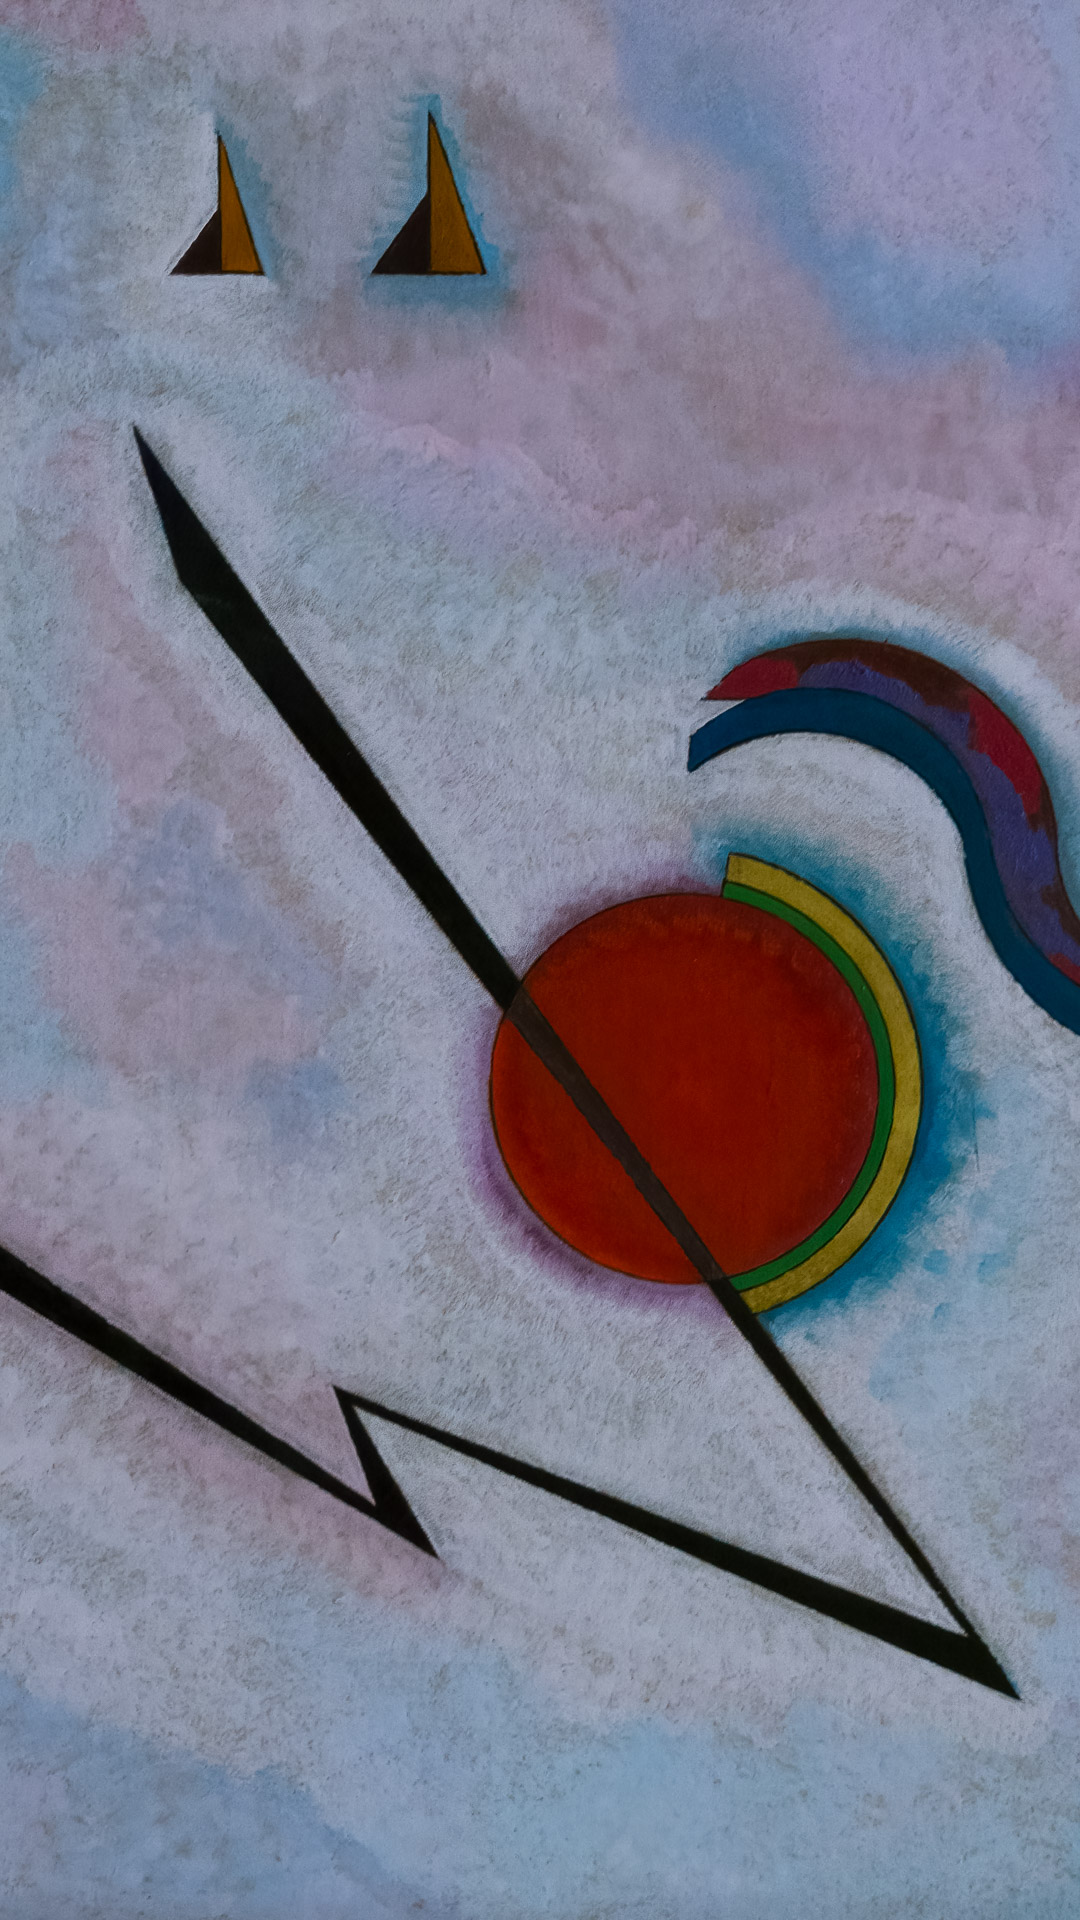 Bring the beauty of the Russian Abstract movement to your mobile with Kandinsky HD painting wallpaper, featuring his colorful and geometric compositions that expressed his spiritual and musical influences.